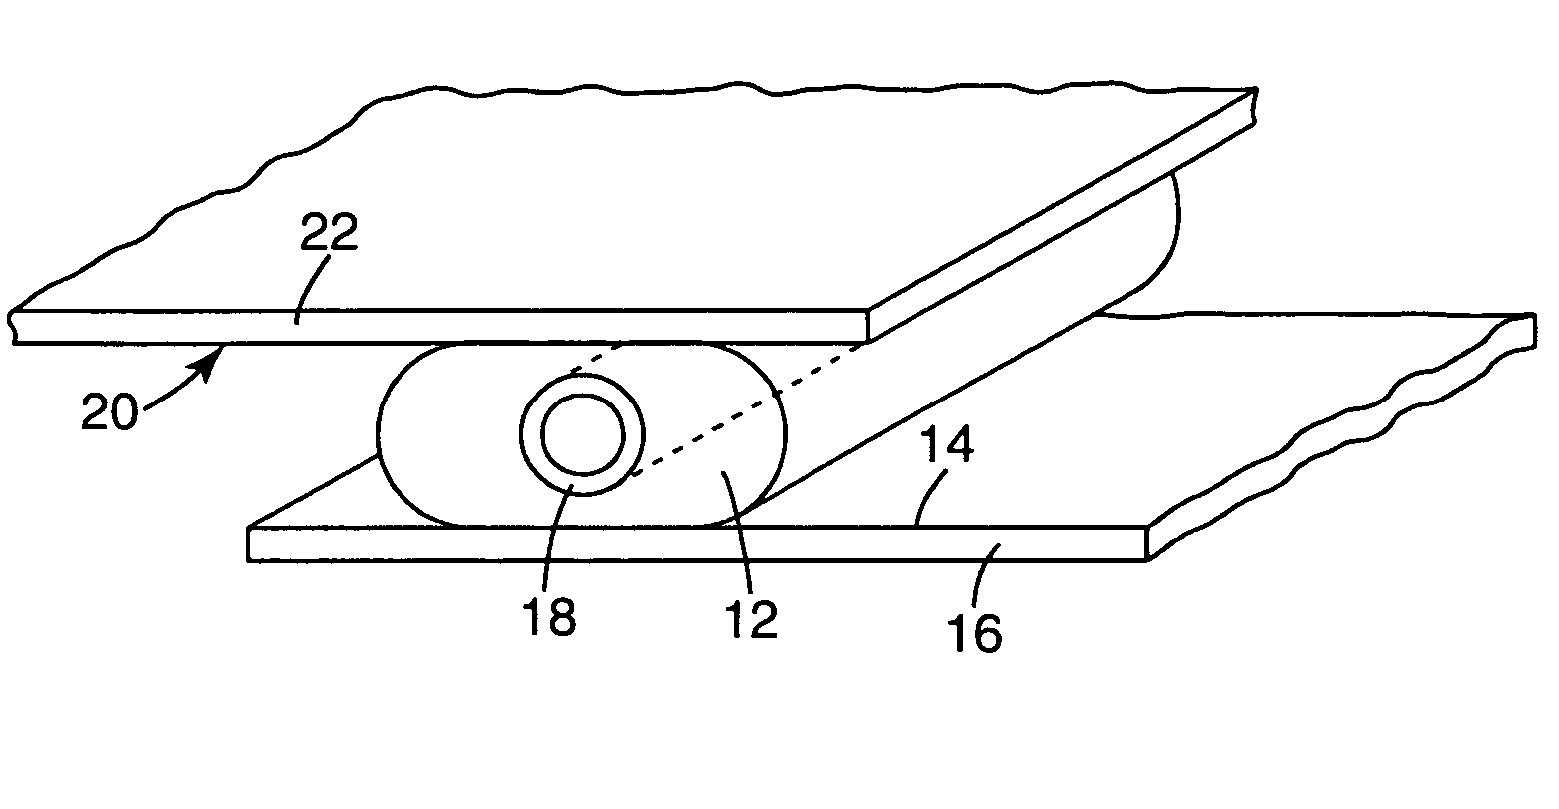 Method of curing using an electroluminescent light